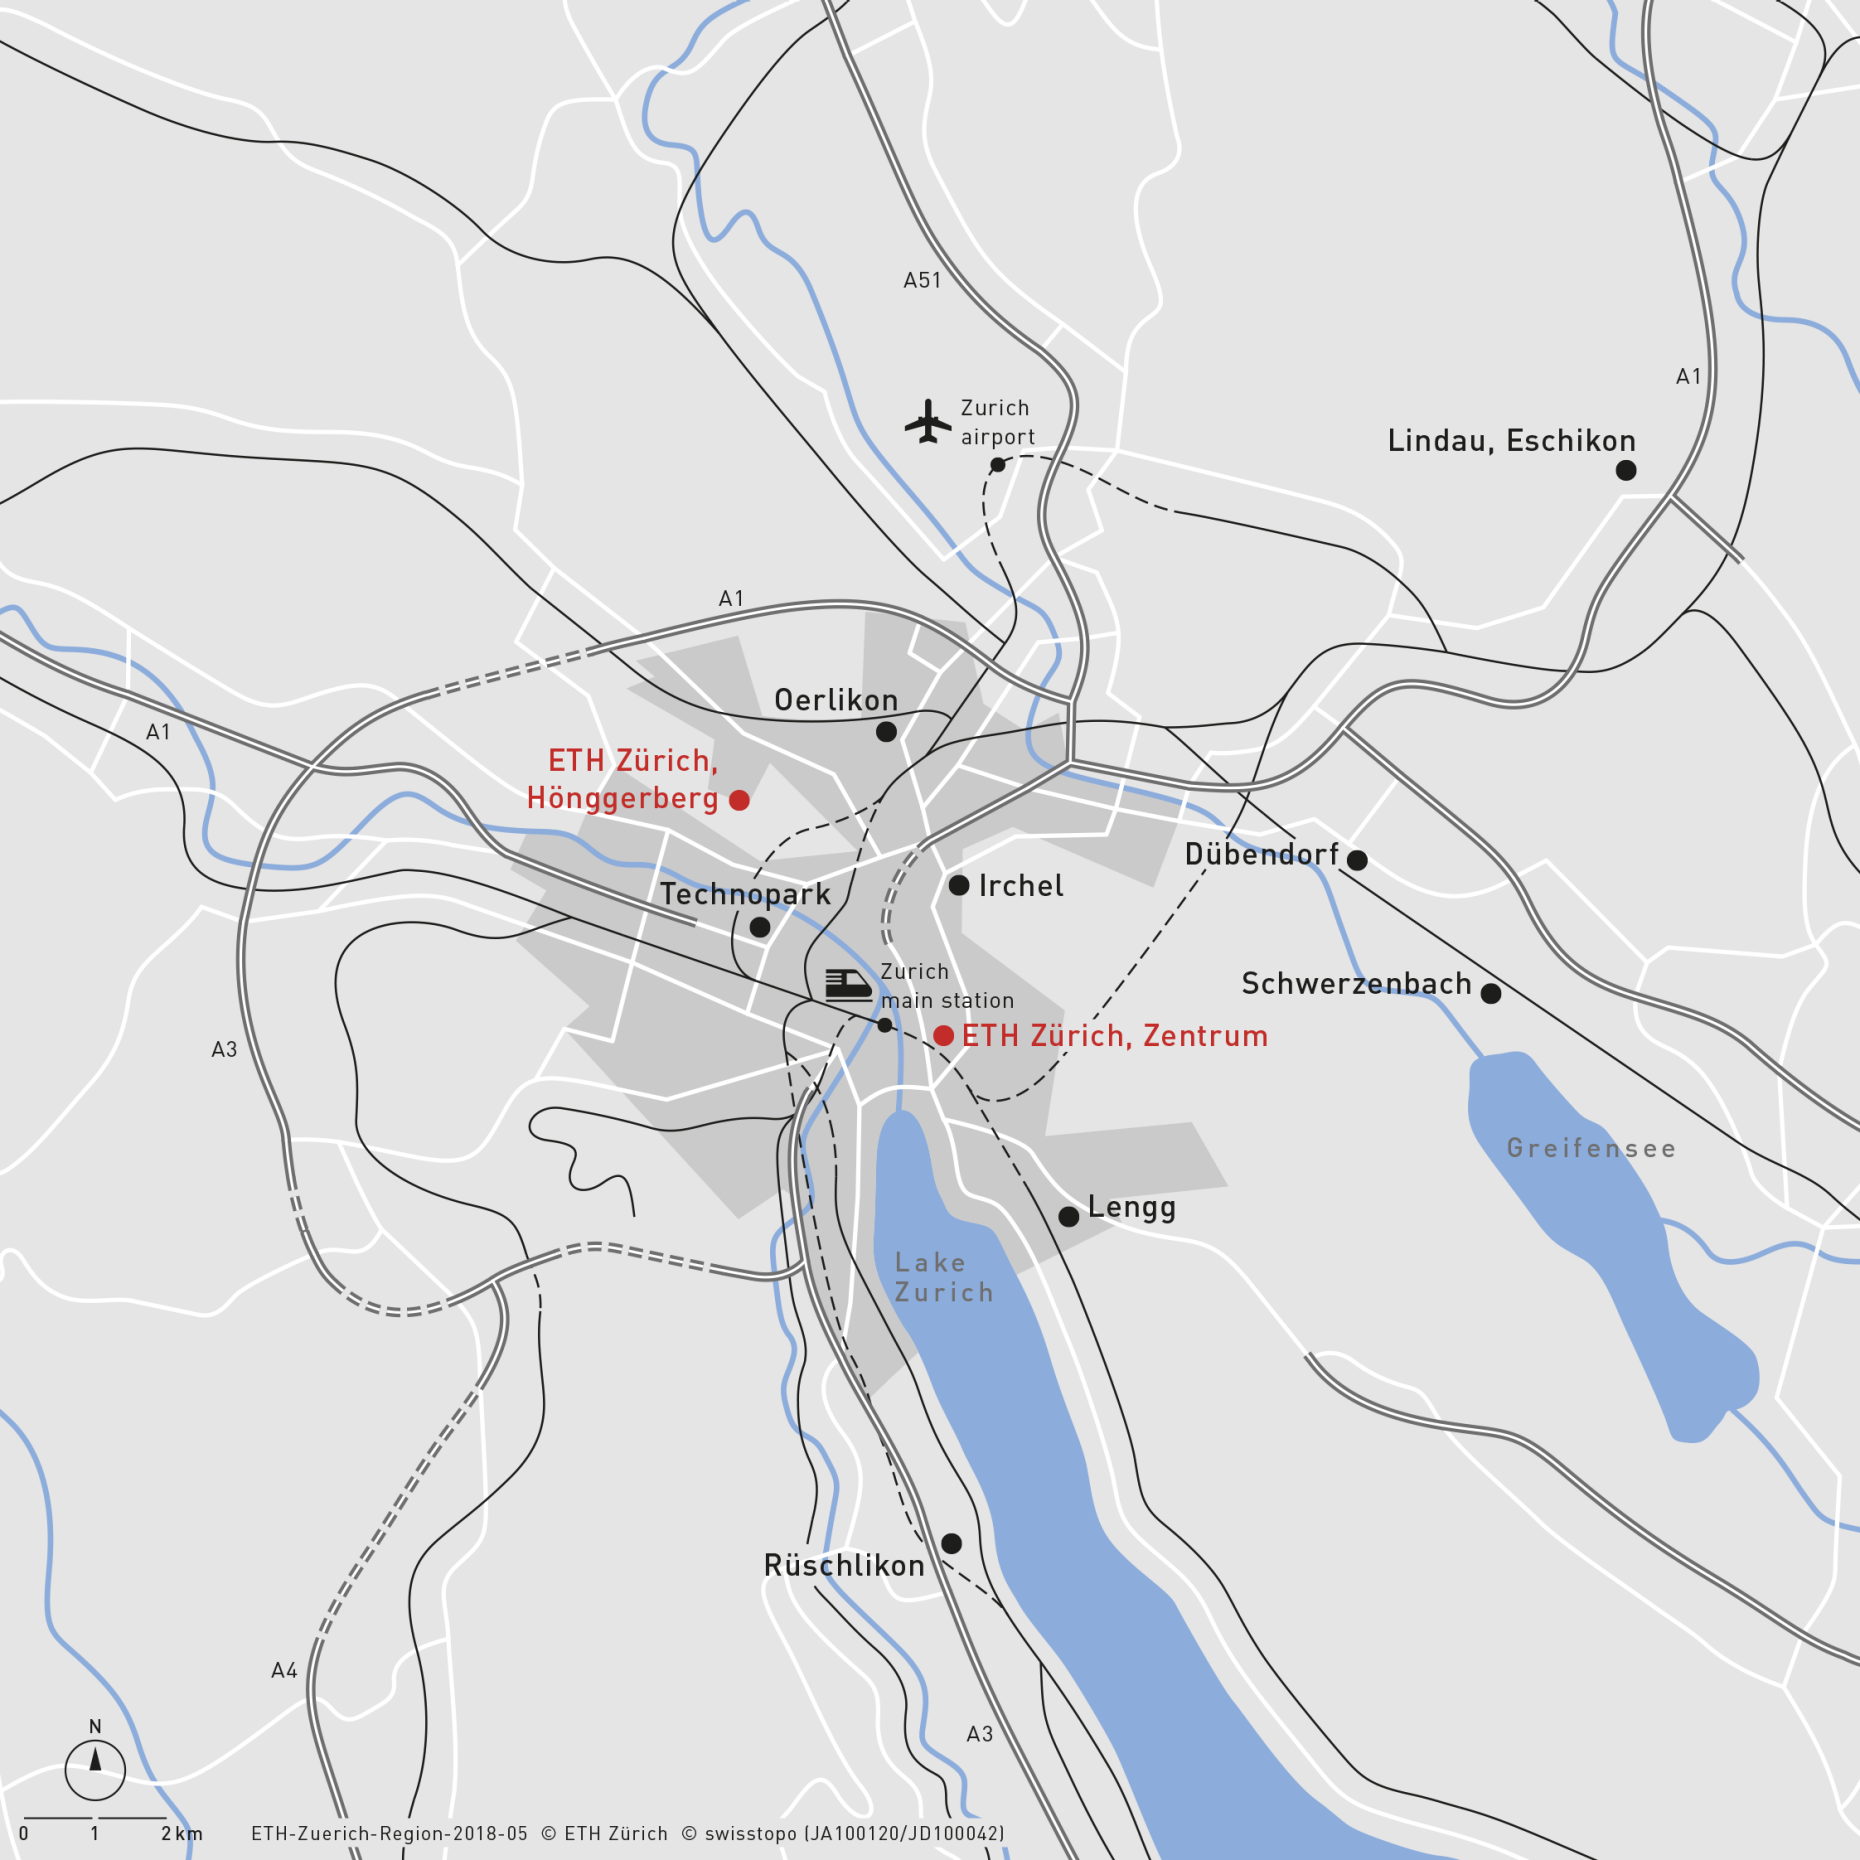 Enlarged view: ETH Zurich is based chiefly in Zurich, where it operates one campus in the Hönggerberg district and another in the city centre. The main site is complemented by strategically selected “external sites”. (Map: ETH Zurich)